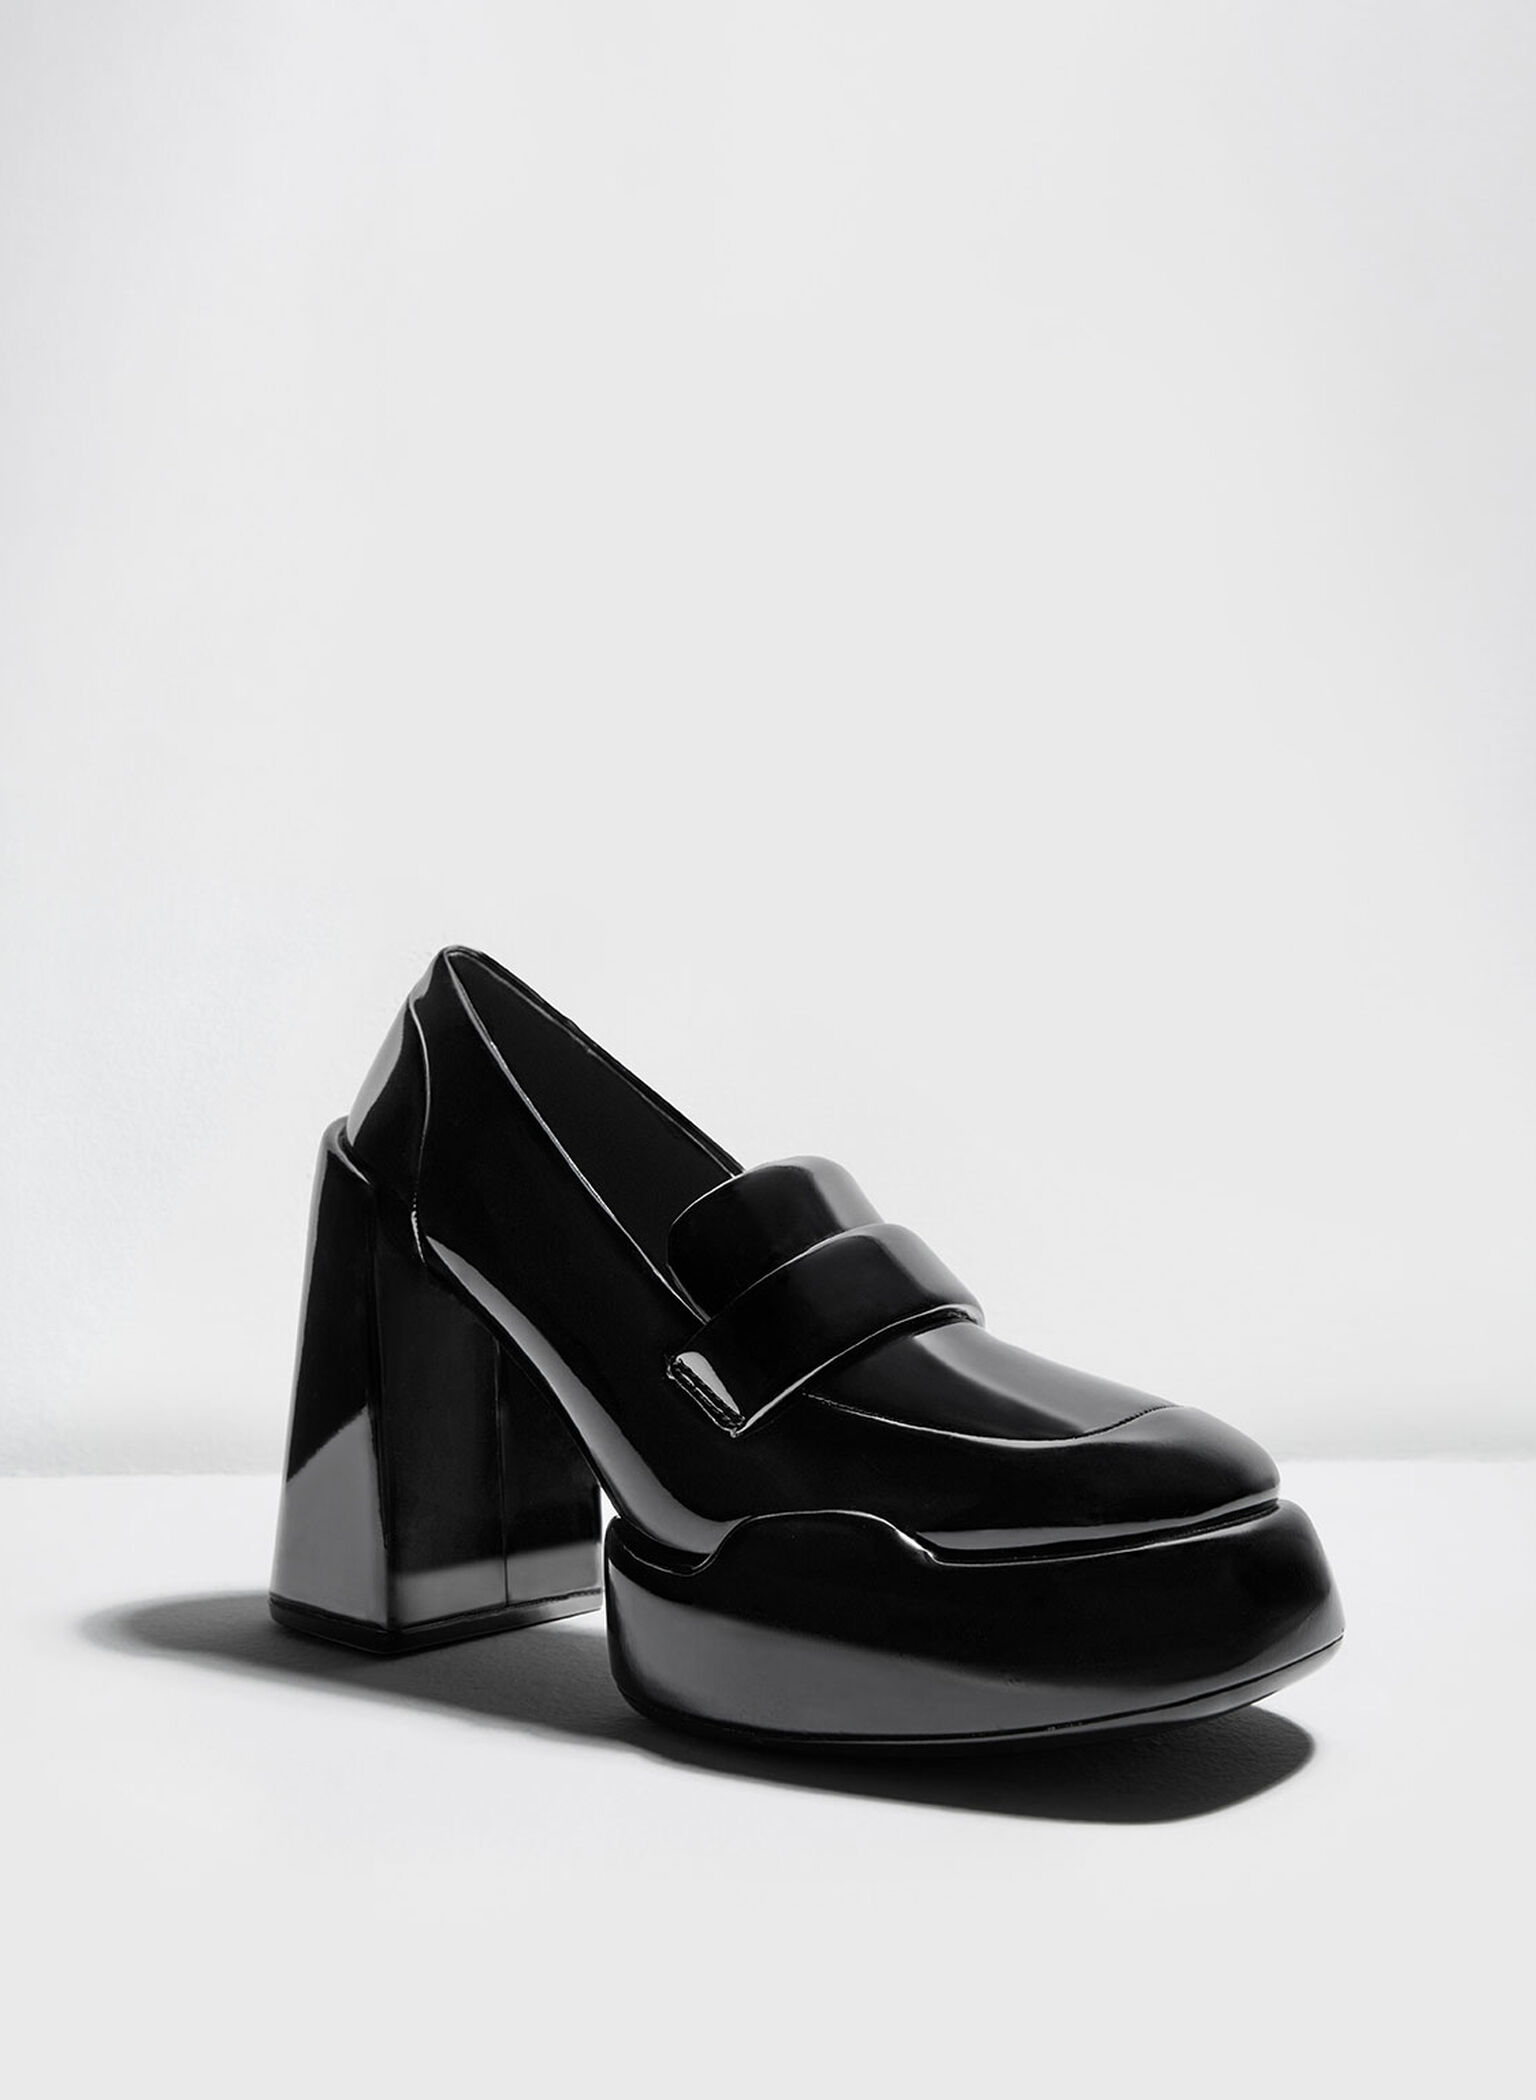 Black Lula Patent Loafer Pumps - CHARLES & KEITH US